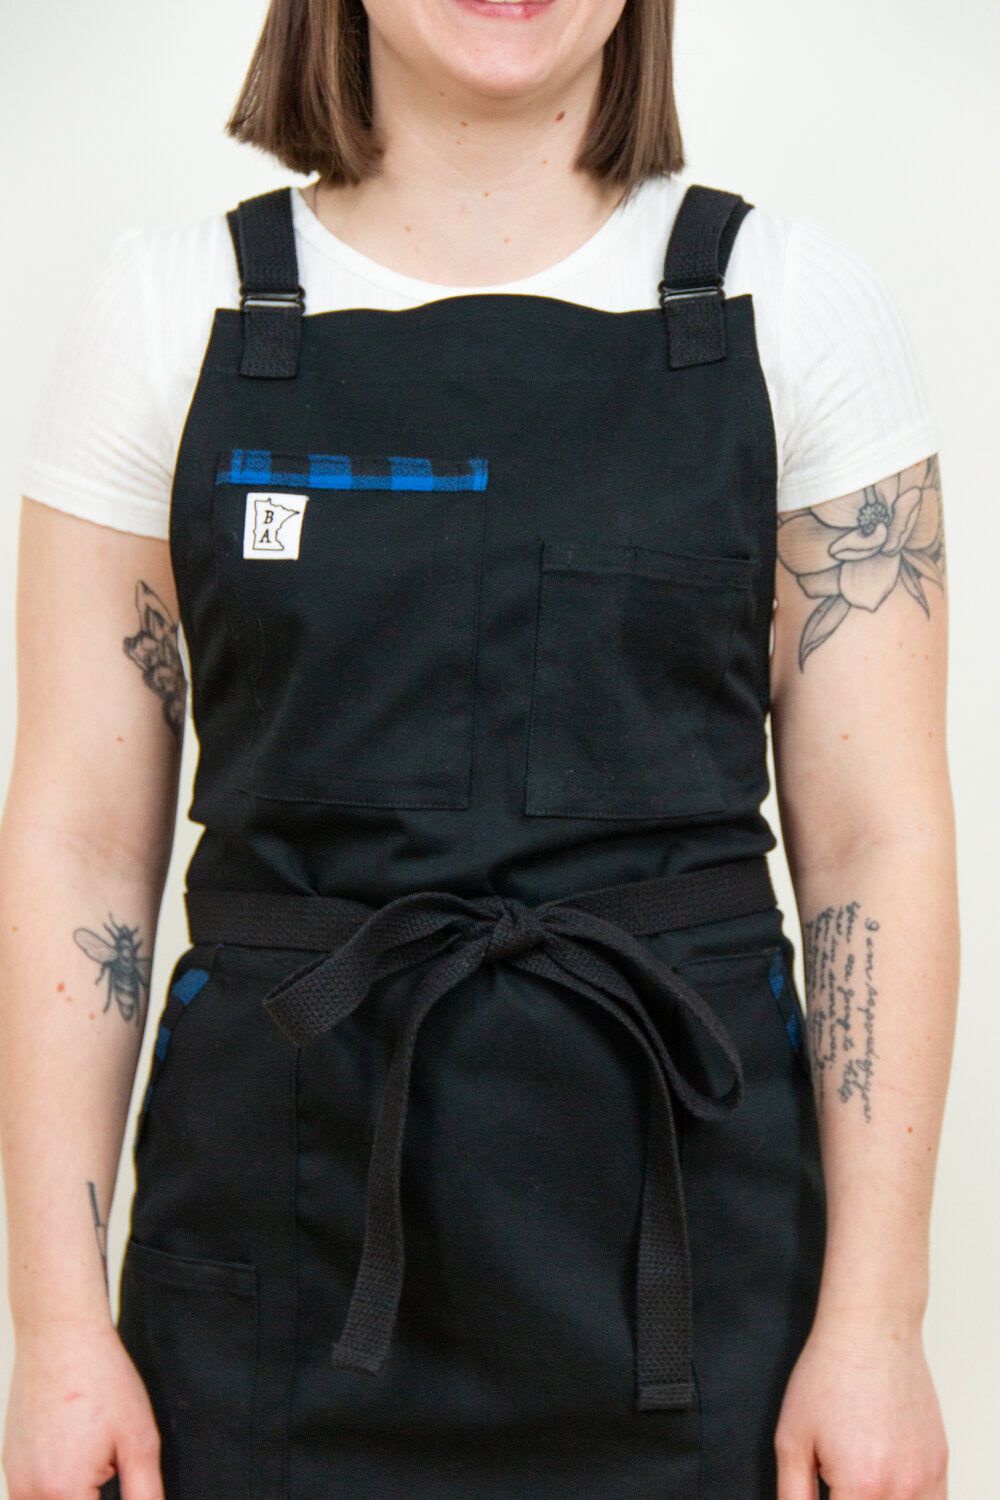 Cotton apron, Black and Blue II, displayed on Emma. Blue flannel accents designed by Craftmade Aprons based in Minnesota.